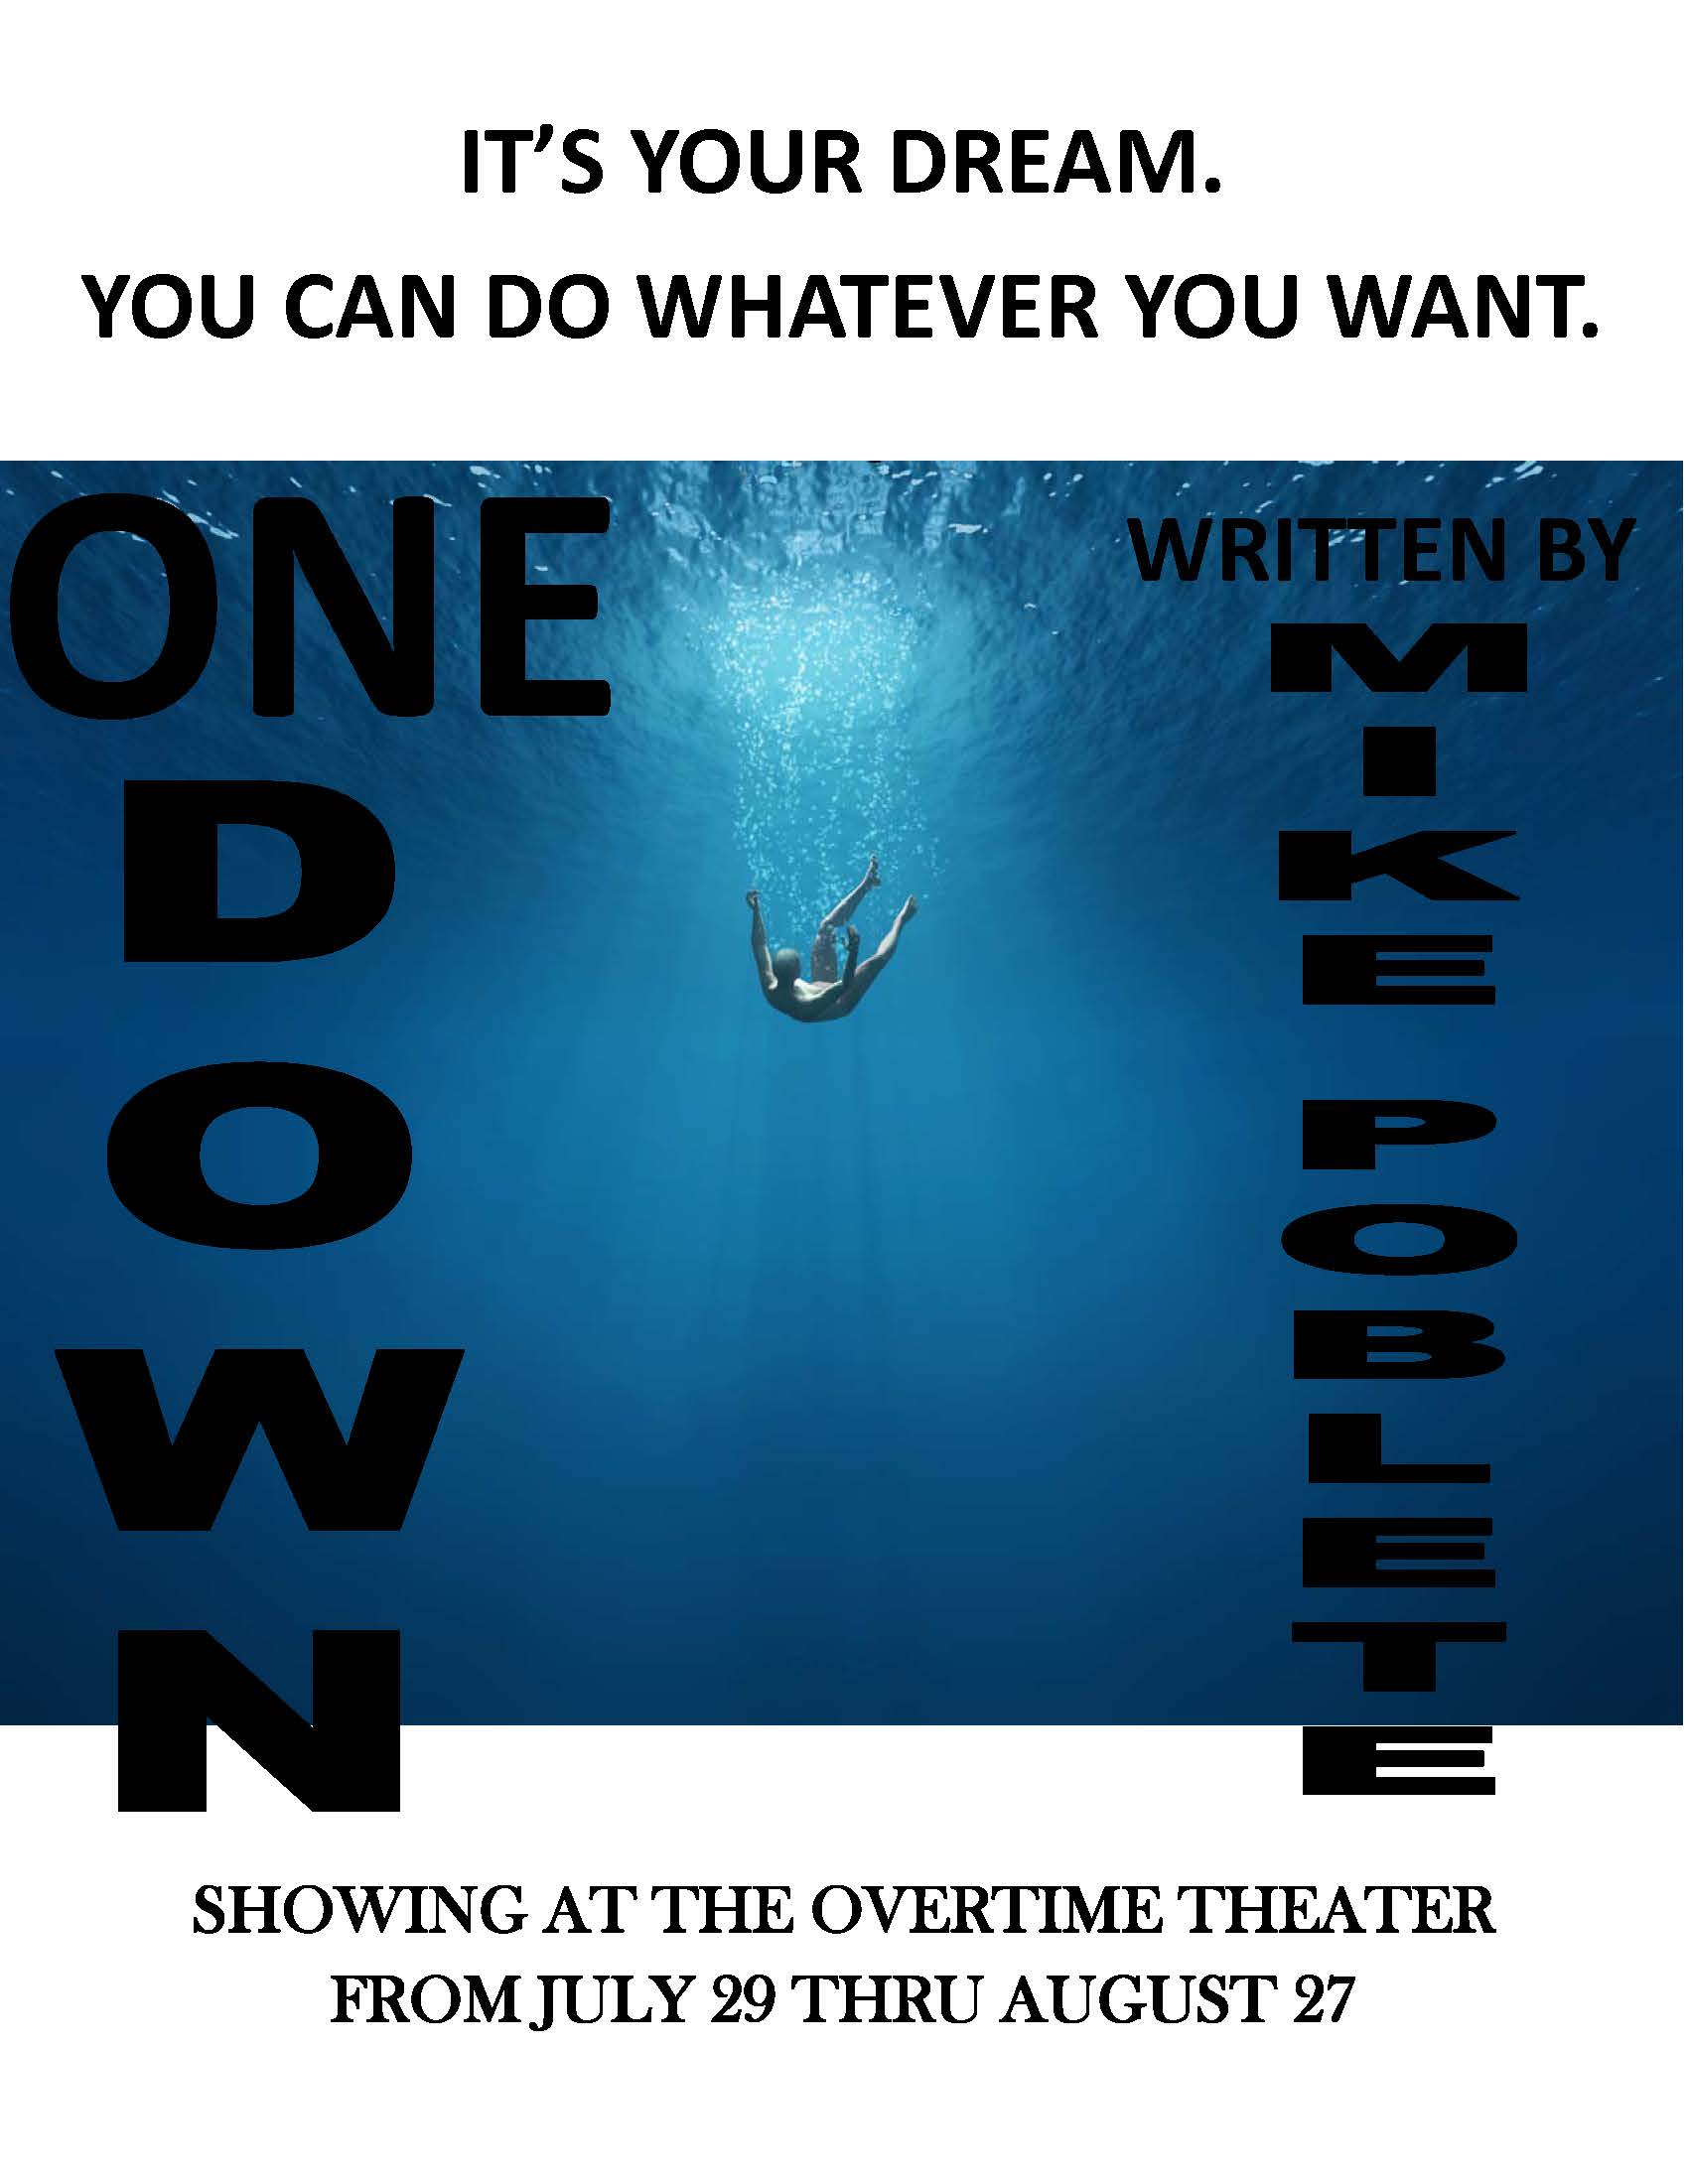 One Down by Overtime Theater